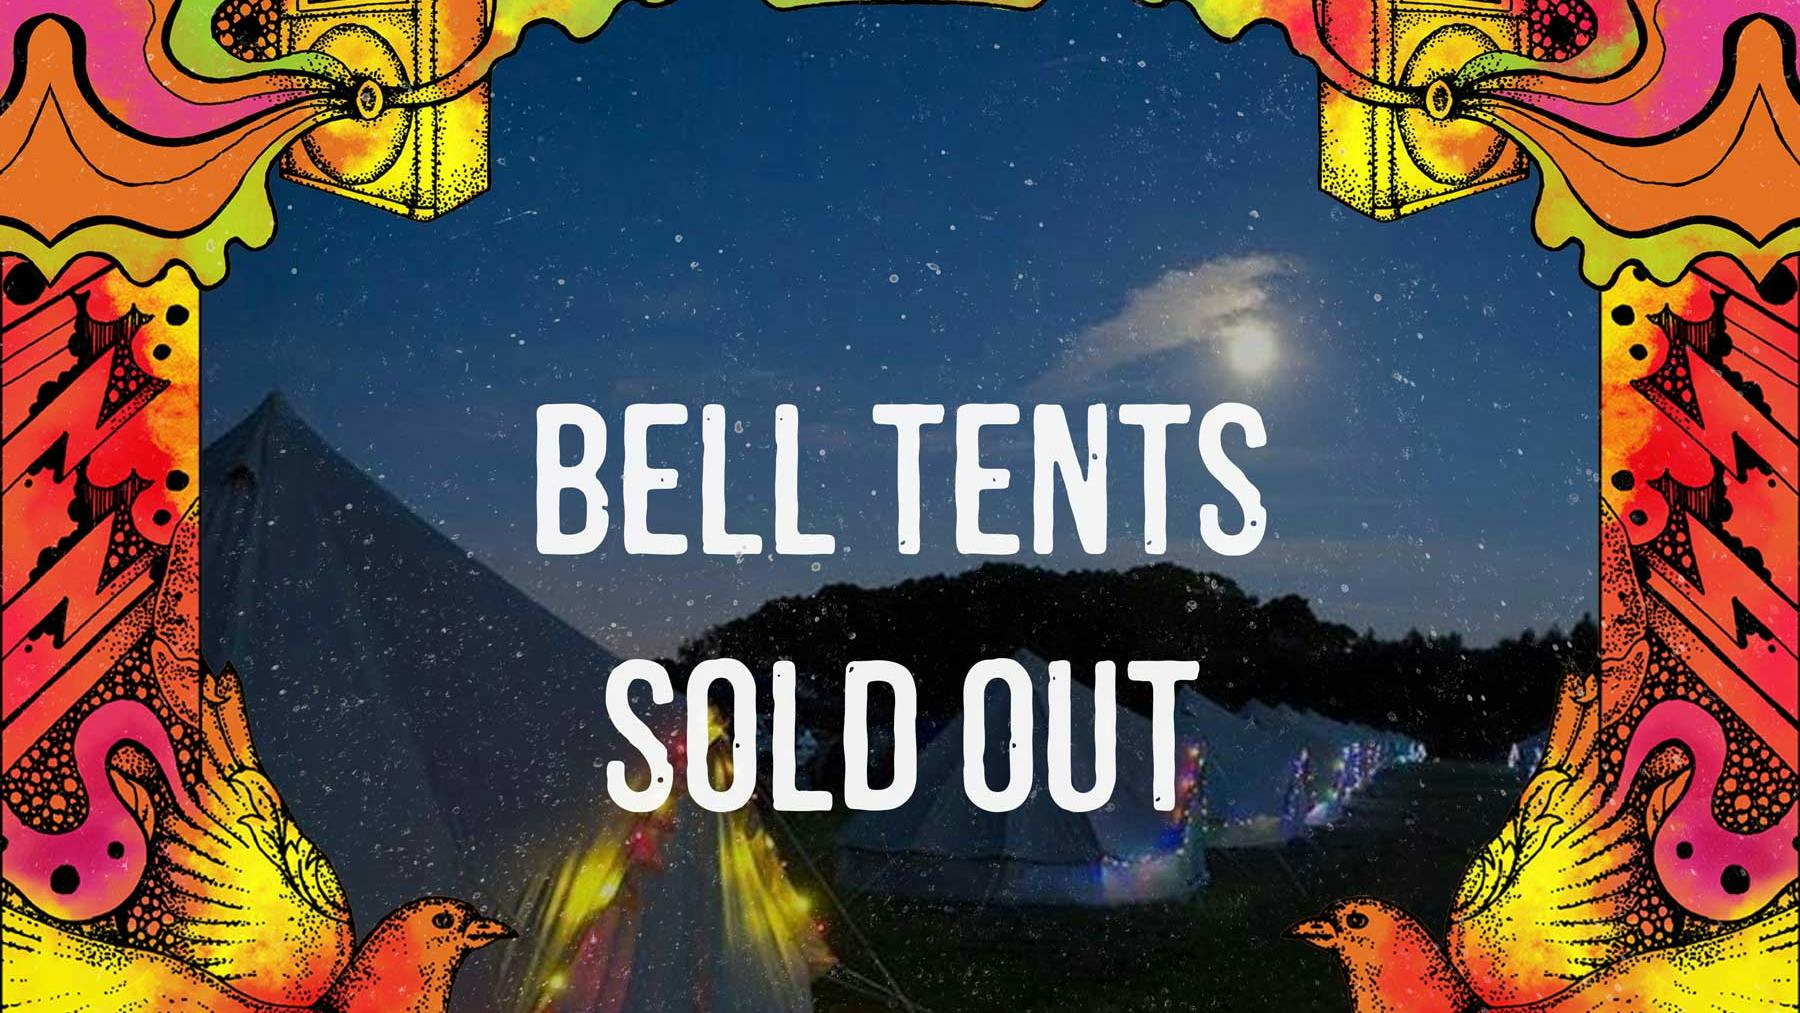 Bell tents sold out!